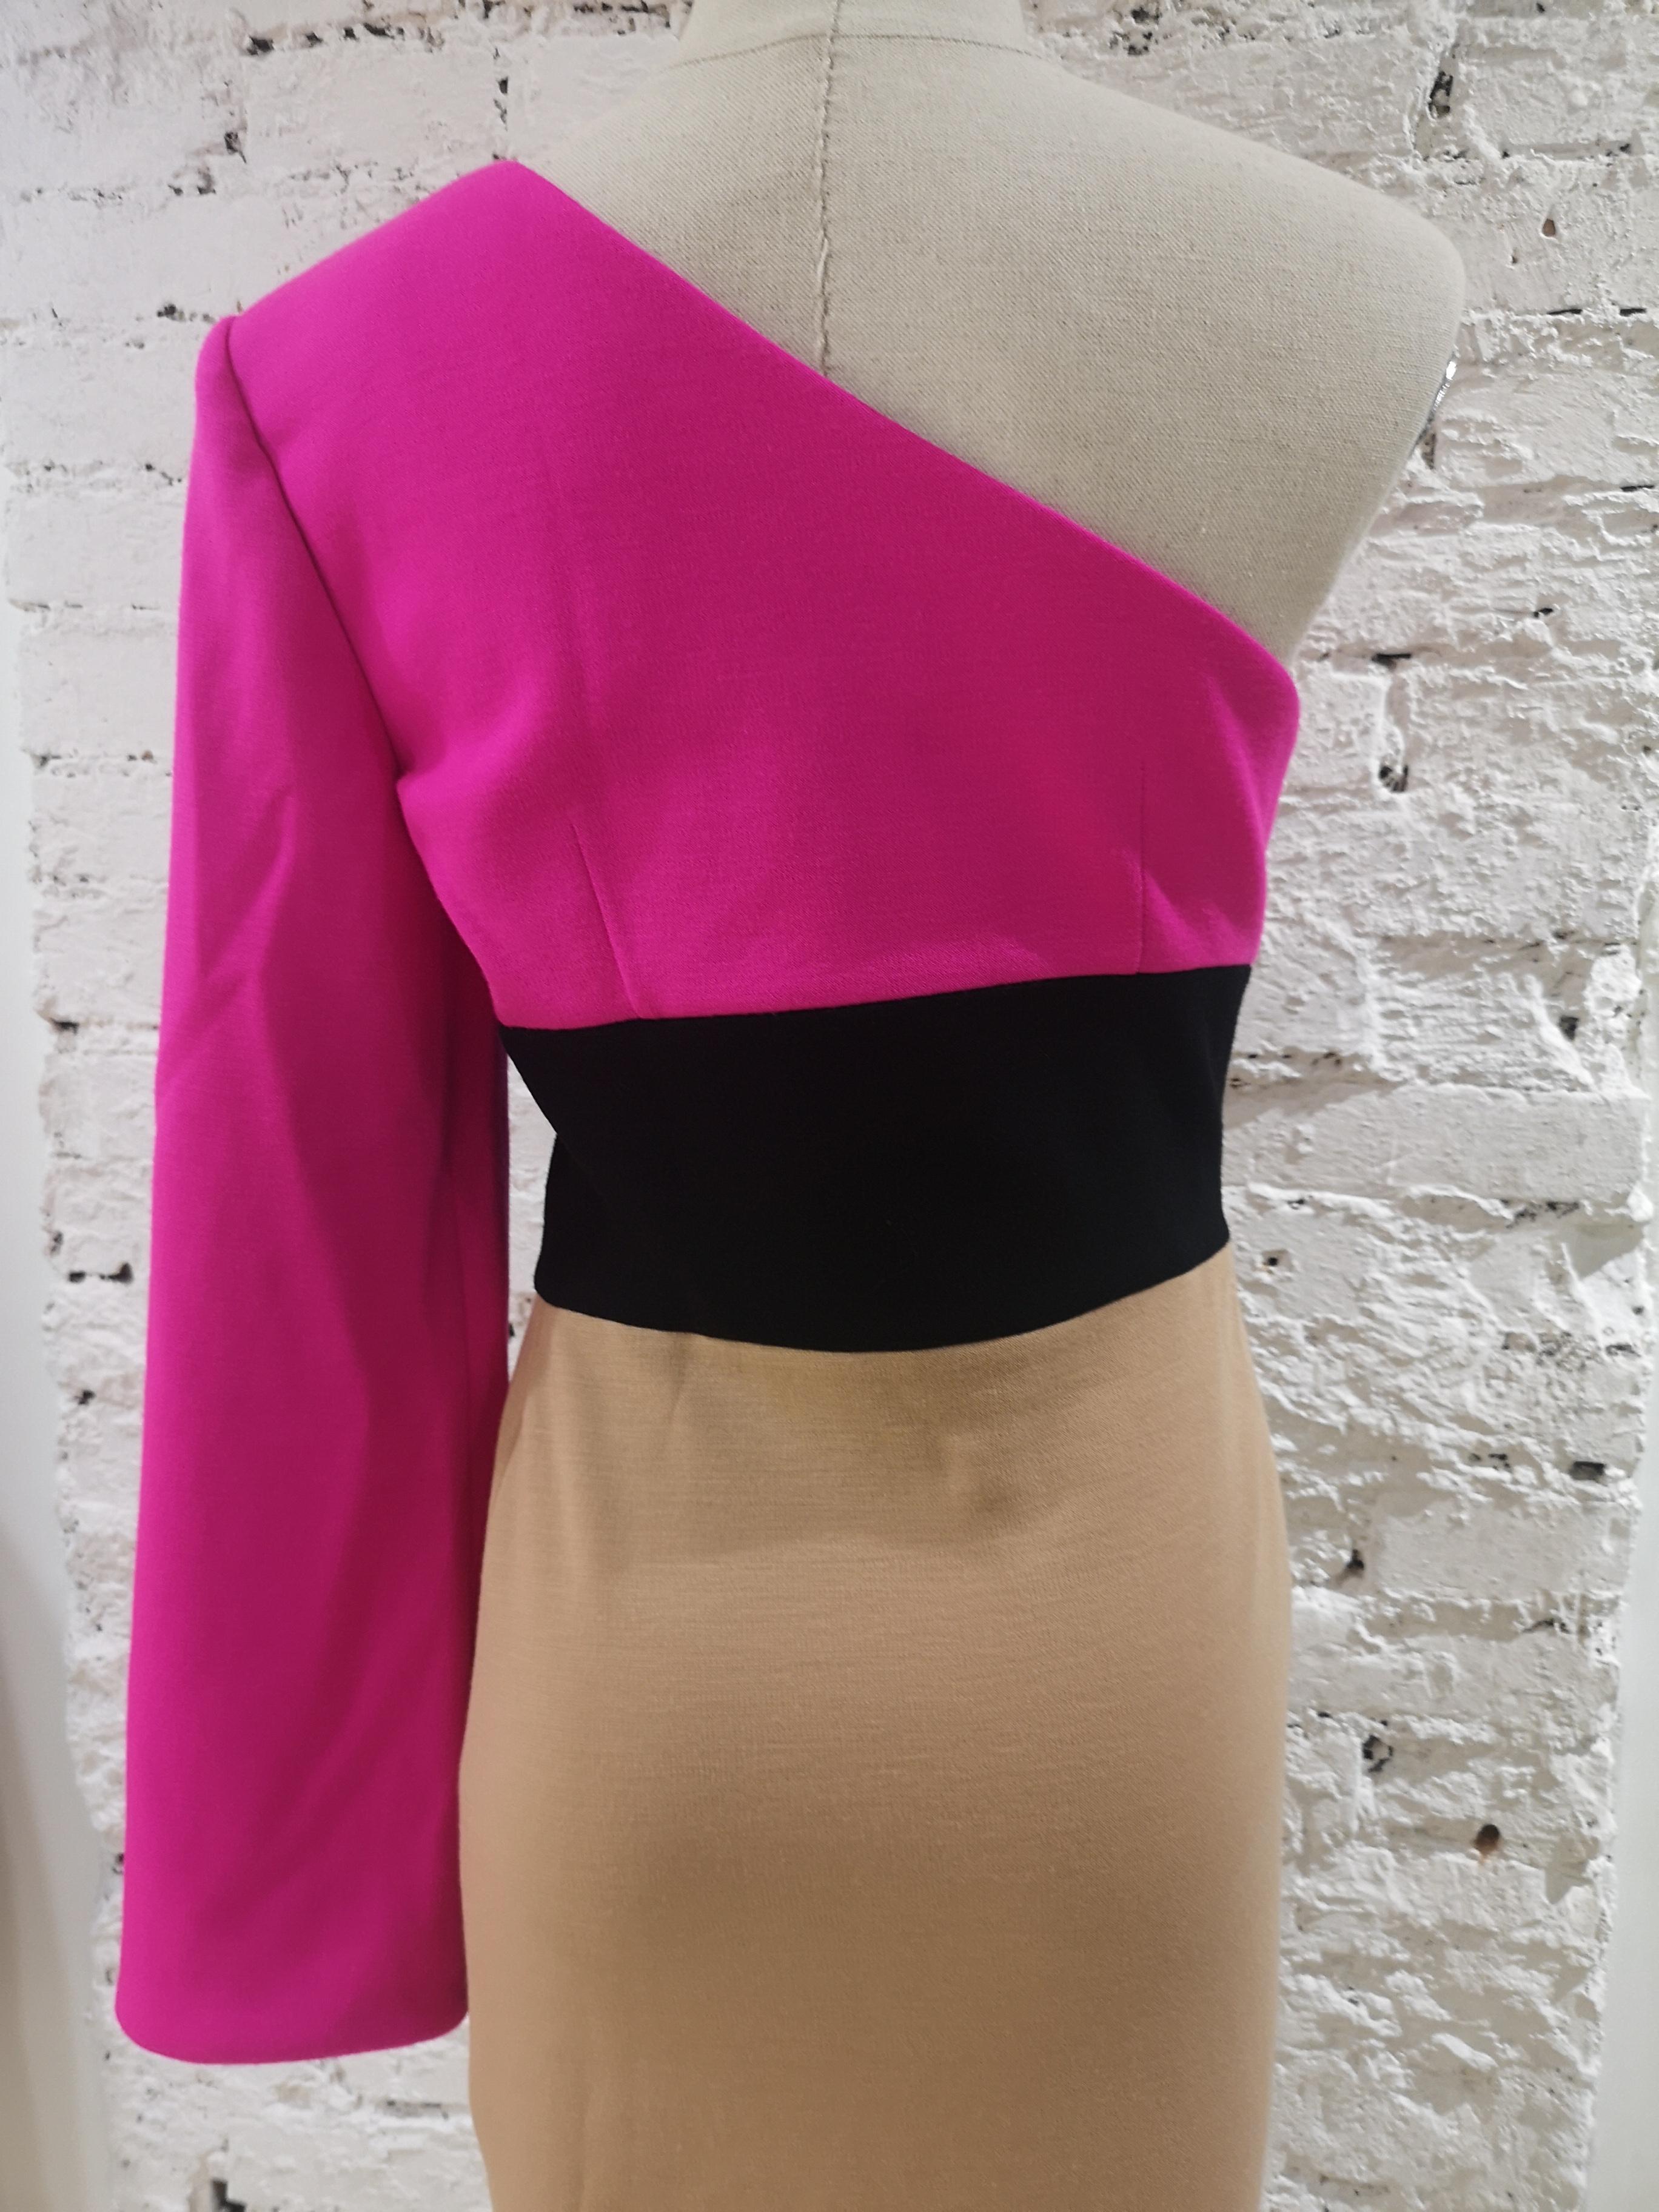 Fausto Puglisi fucsia black and beije wool dress  In Excellent Condition For Sale In Capri, IT